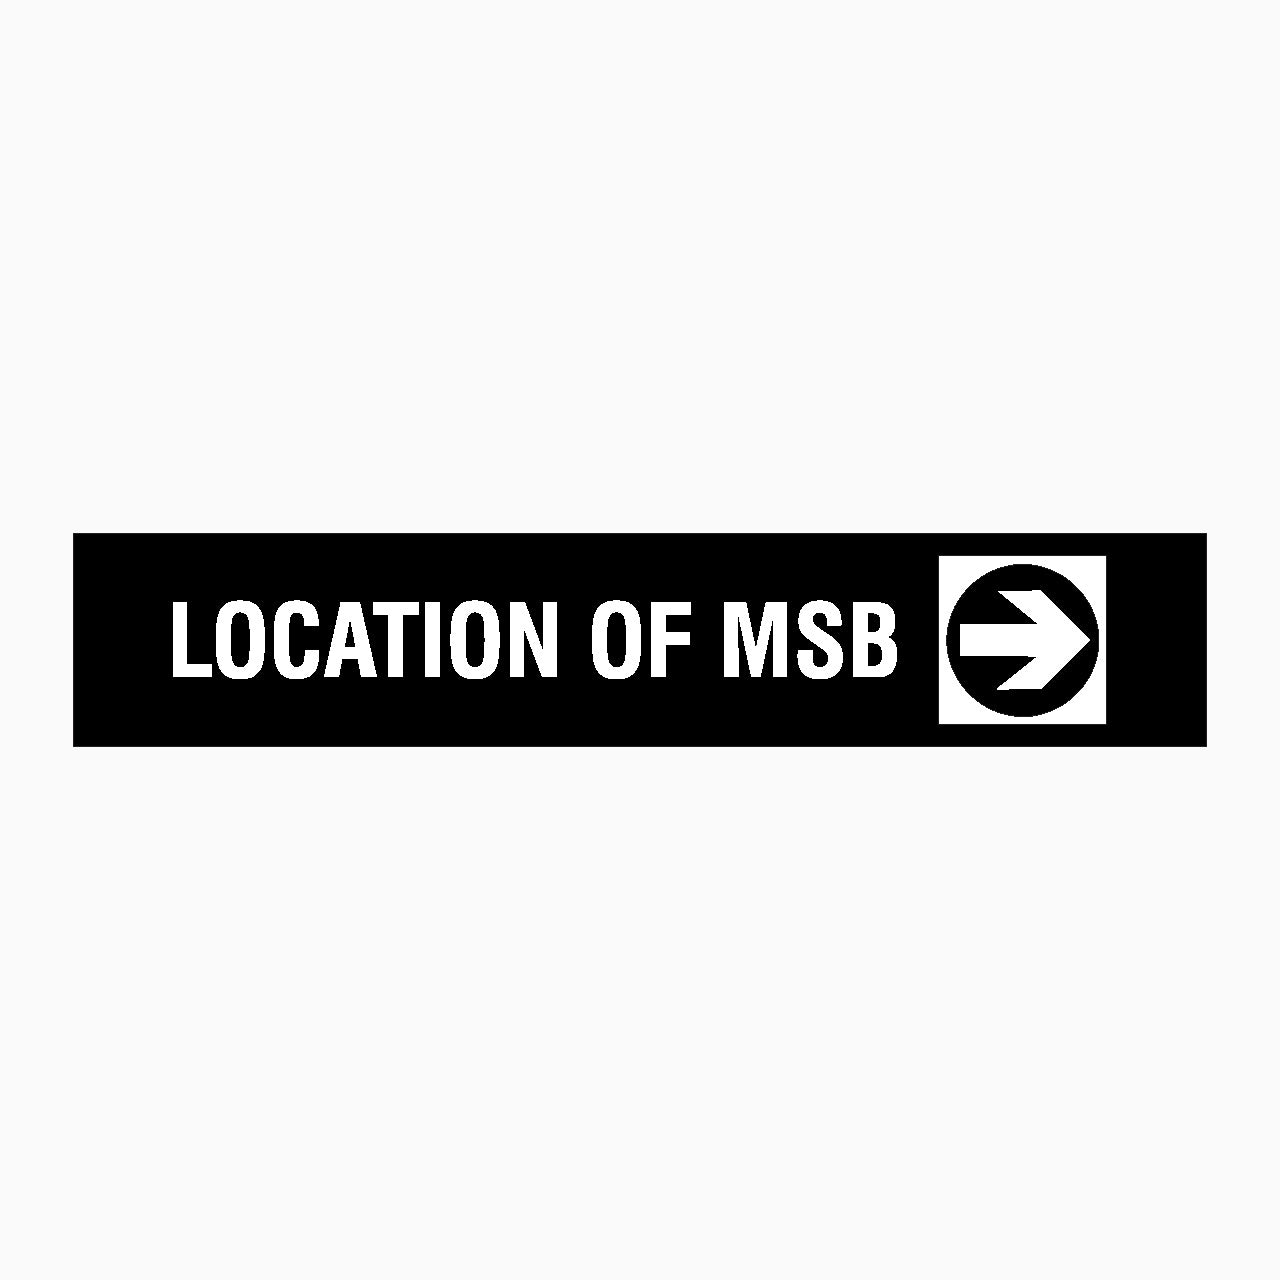 LOCATION OF MSB - RIGHT ARROW SIGN